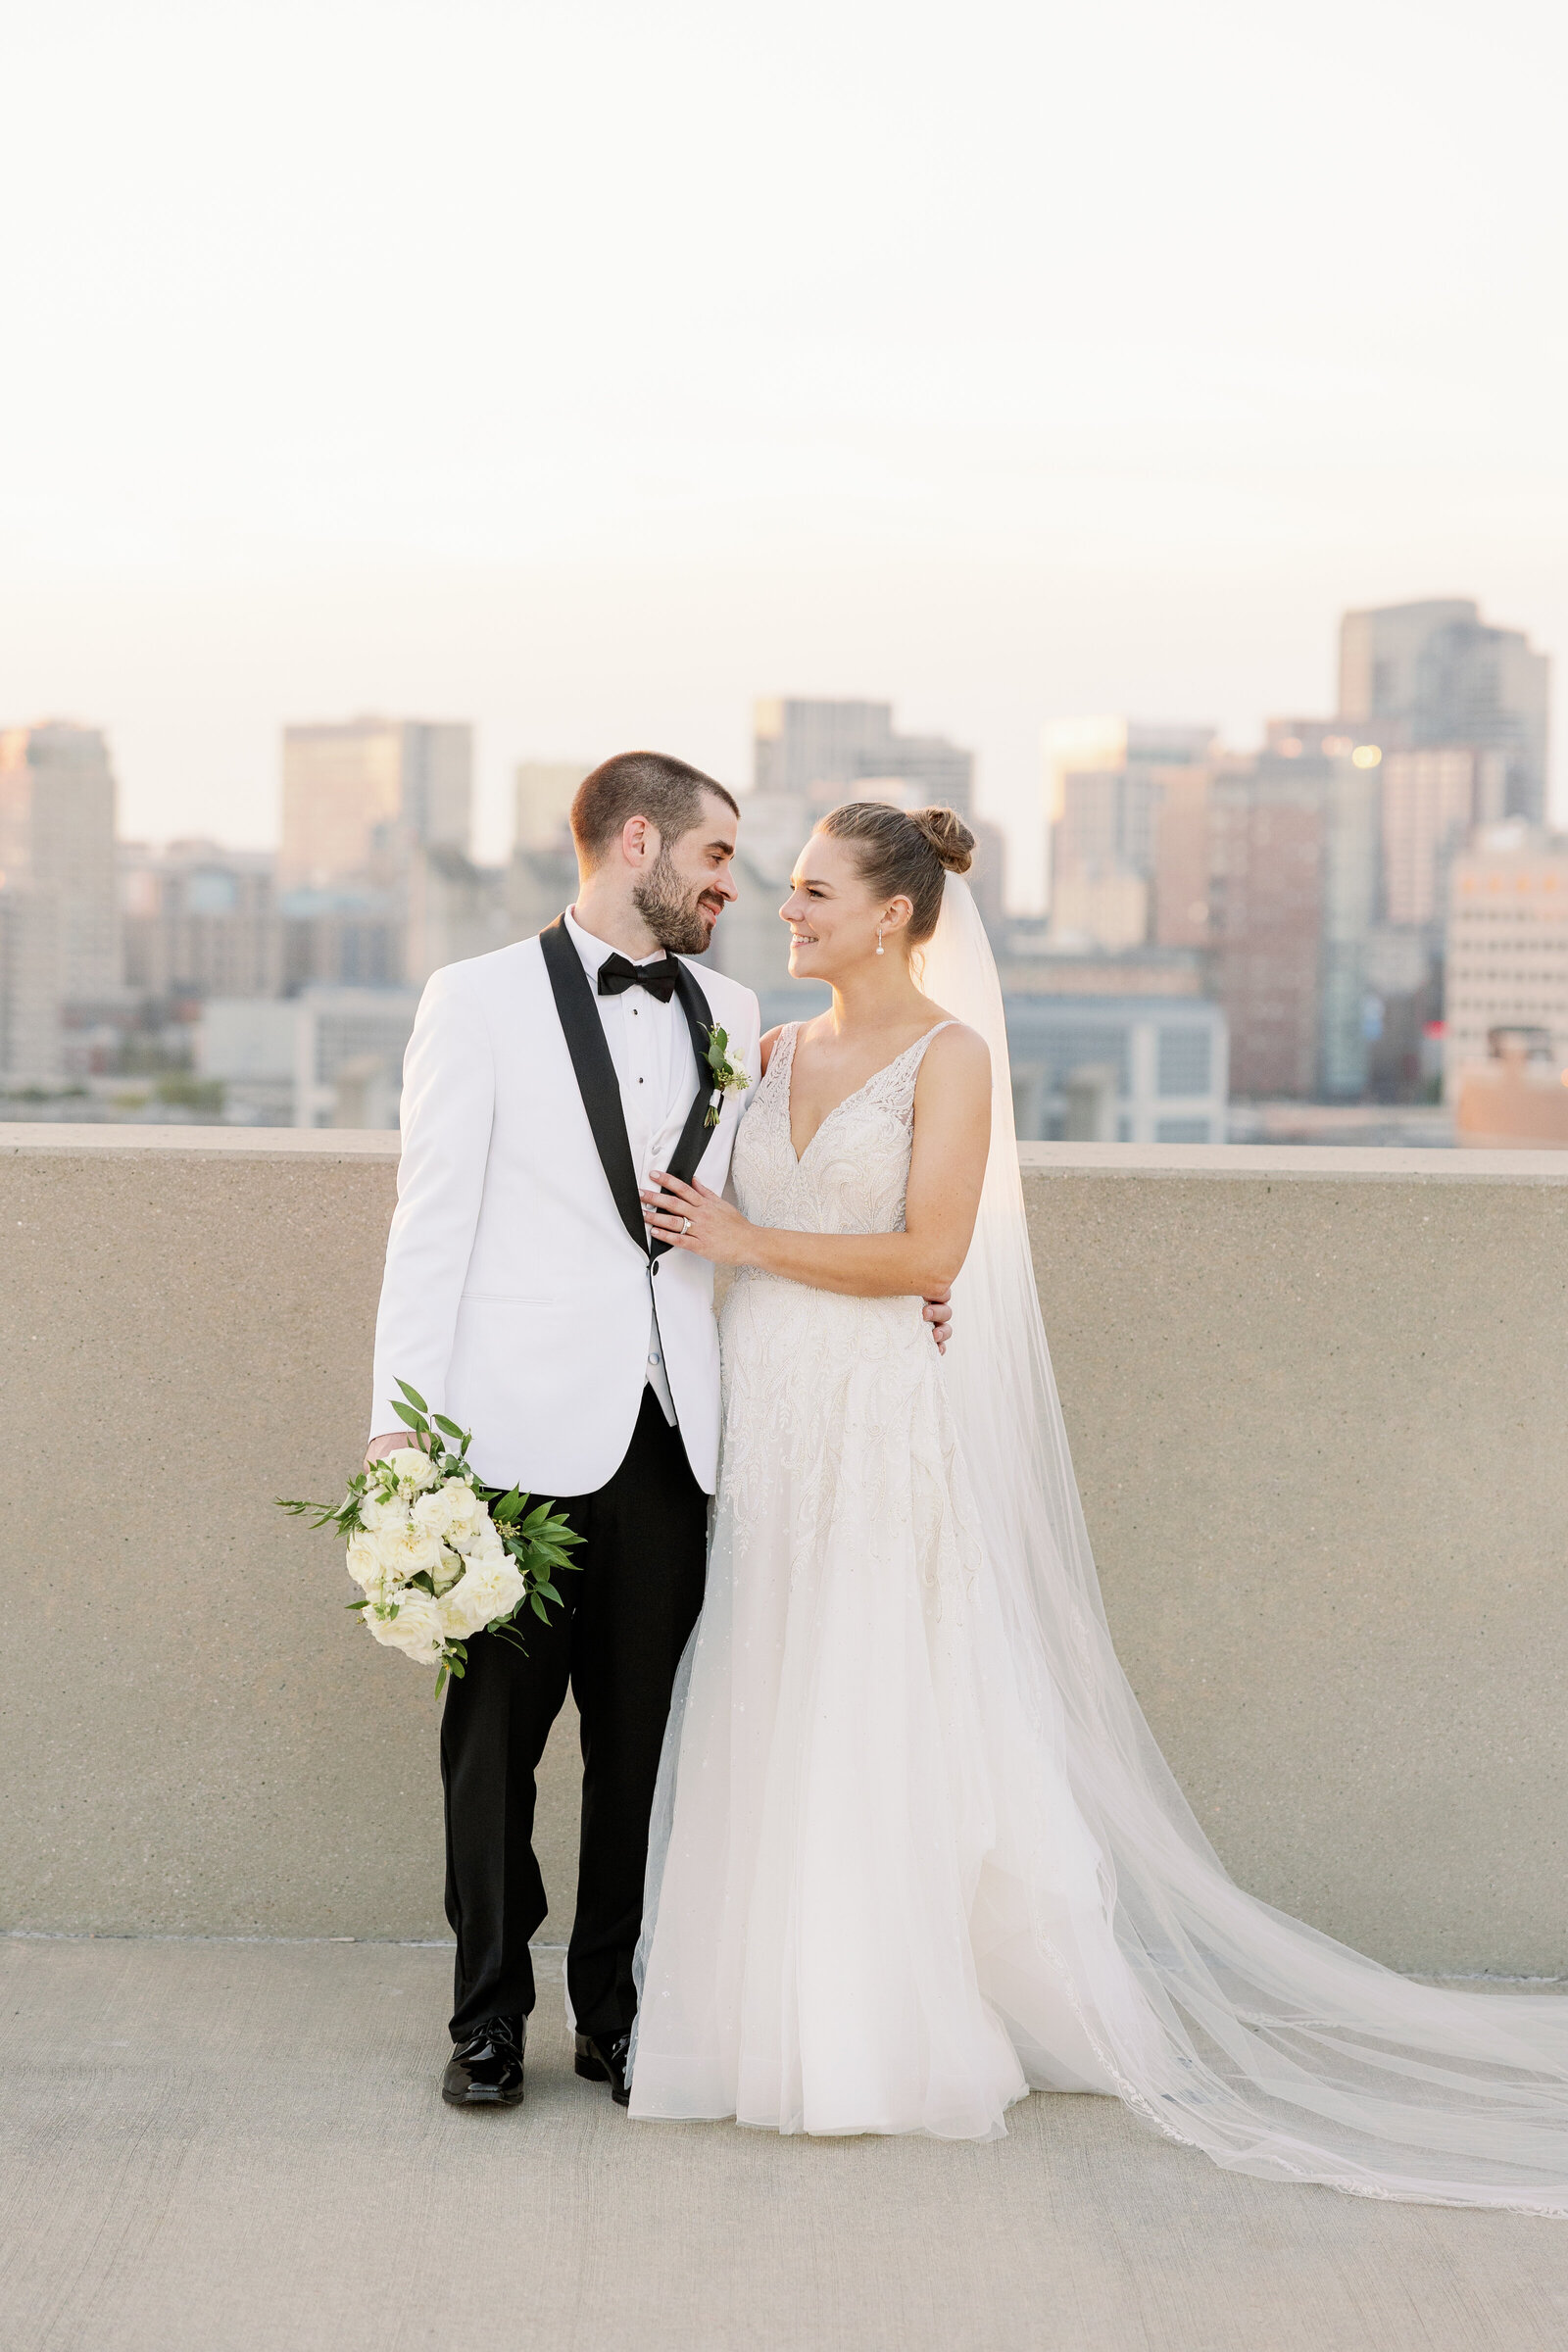 Wedding couple standing on a rooftop overlooking a city skyline.